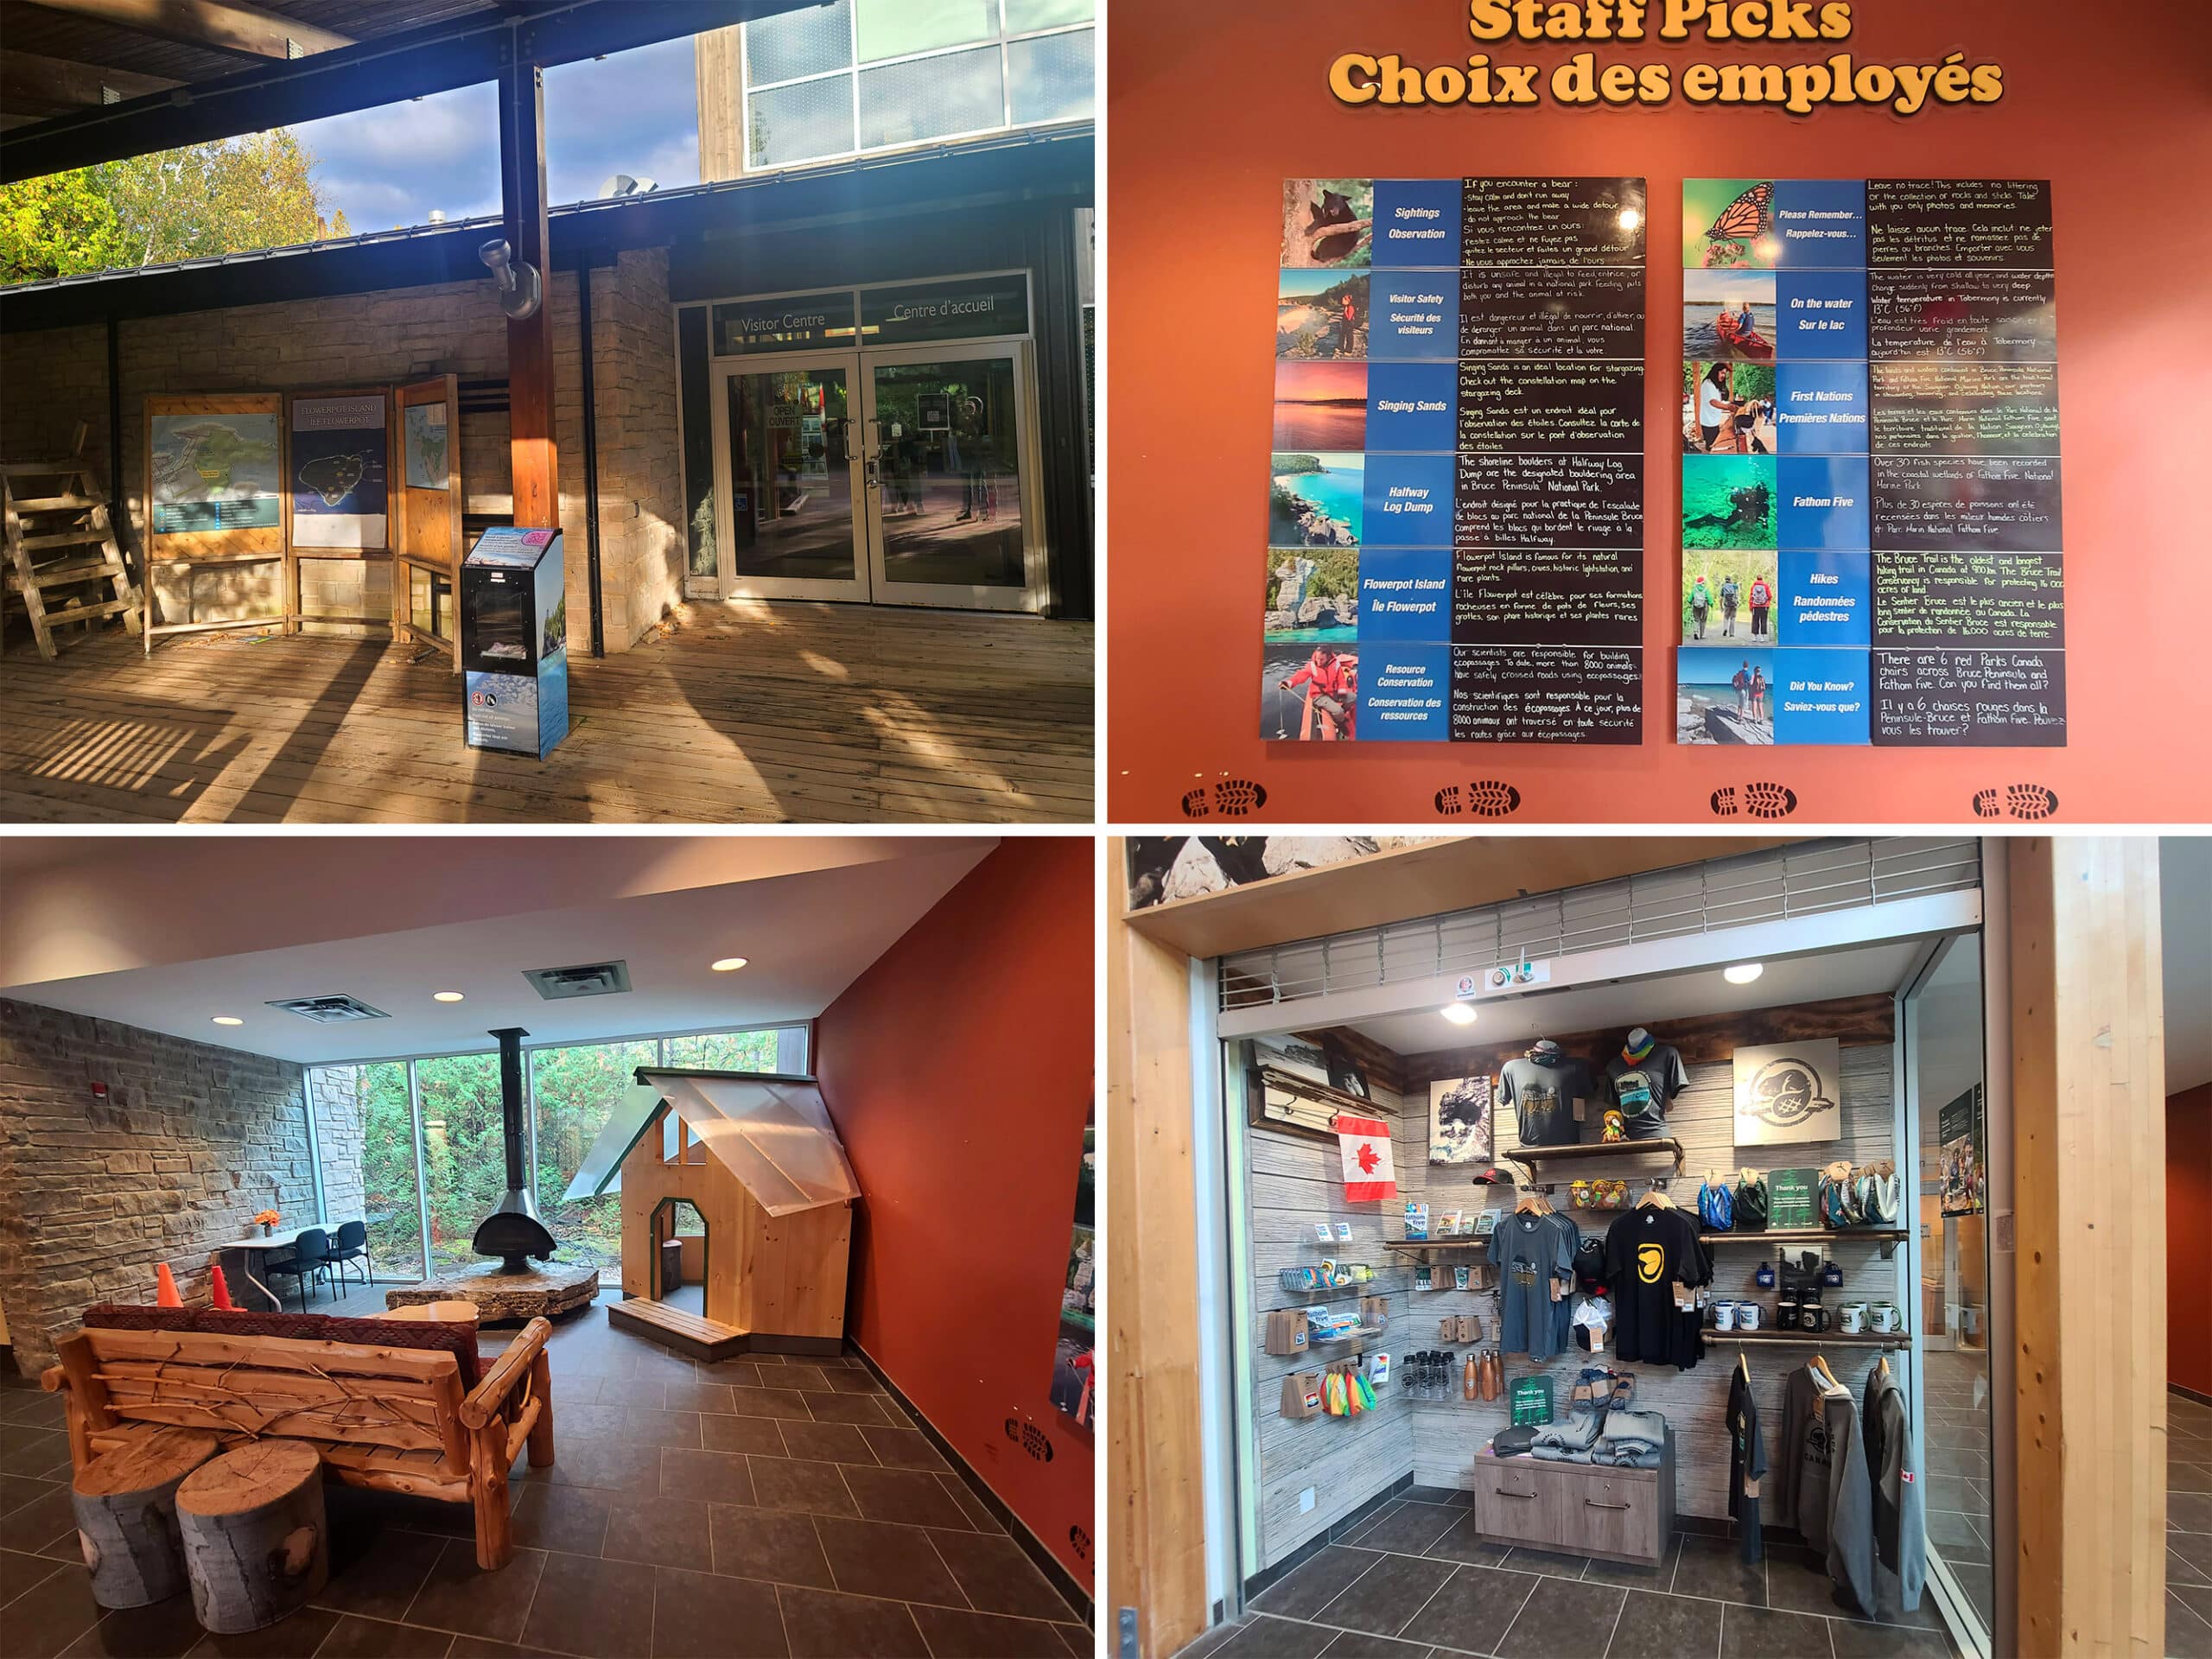 4 part image showing the exterior and interior of the bruce peninsula national park visitor centre, including the front door, lounge area, and store.